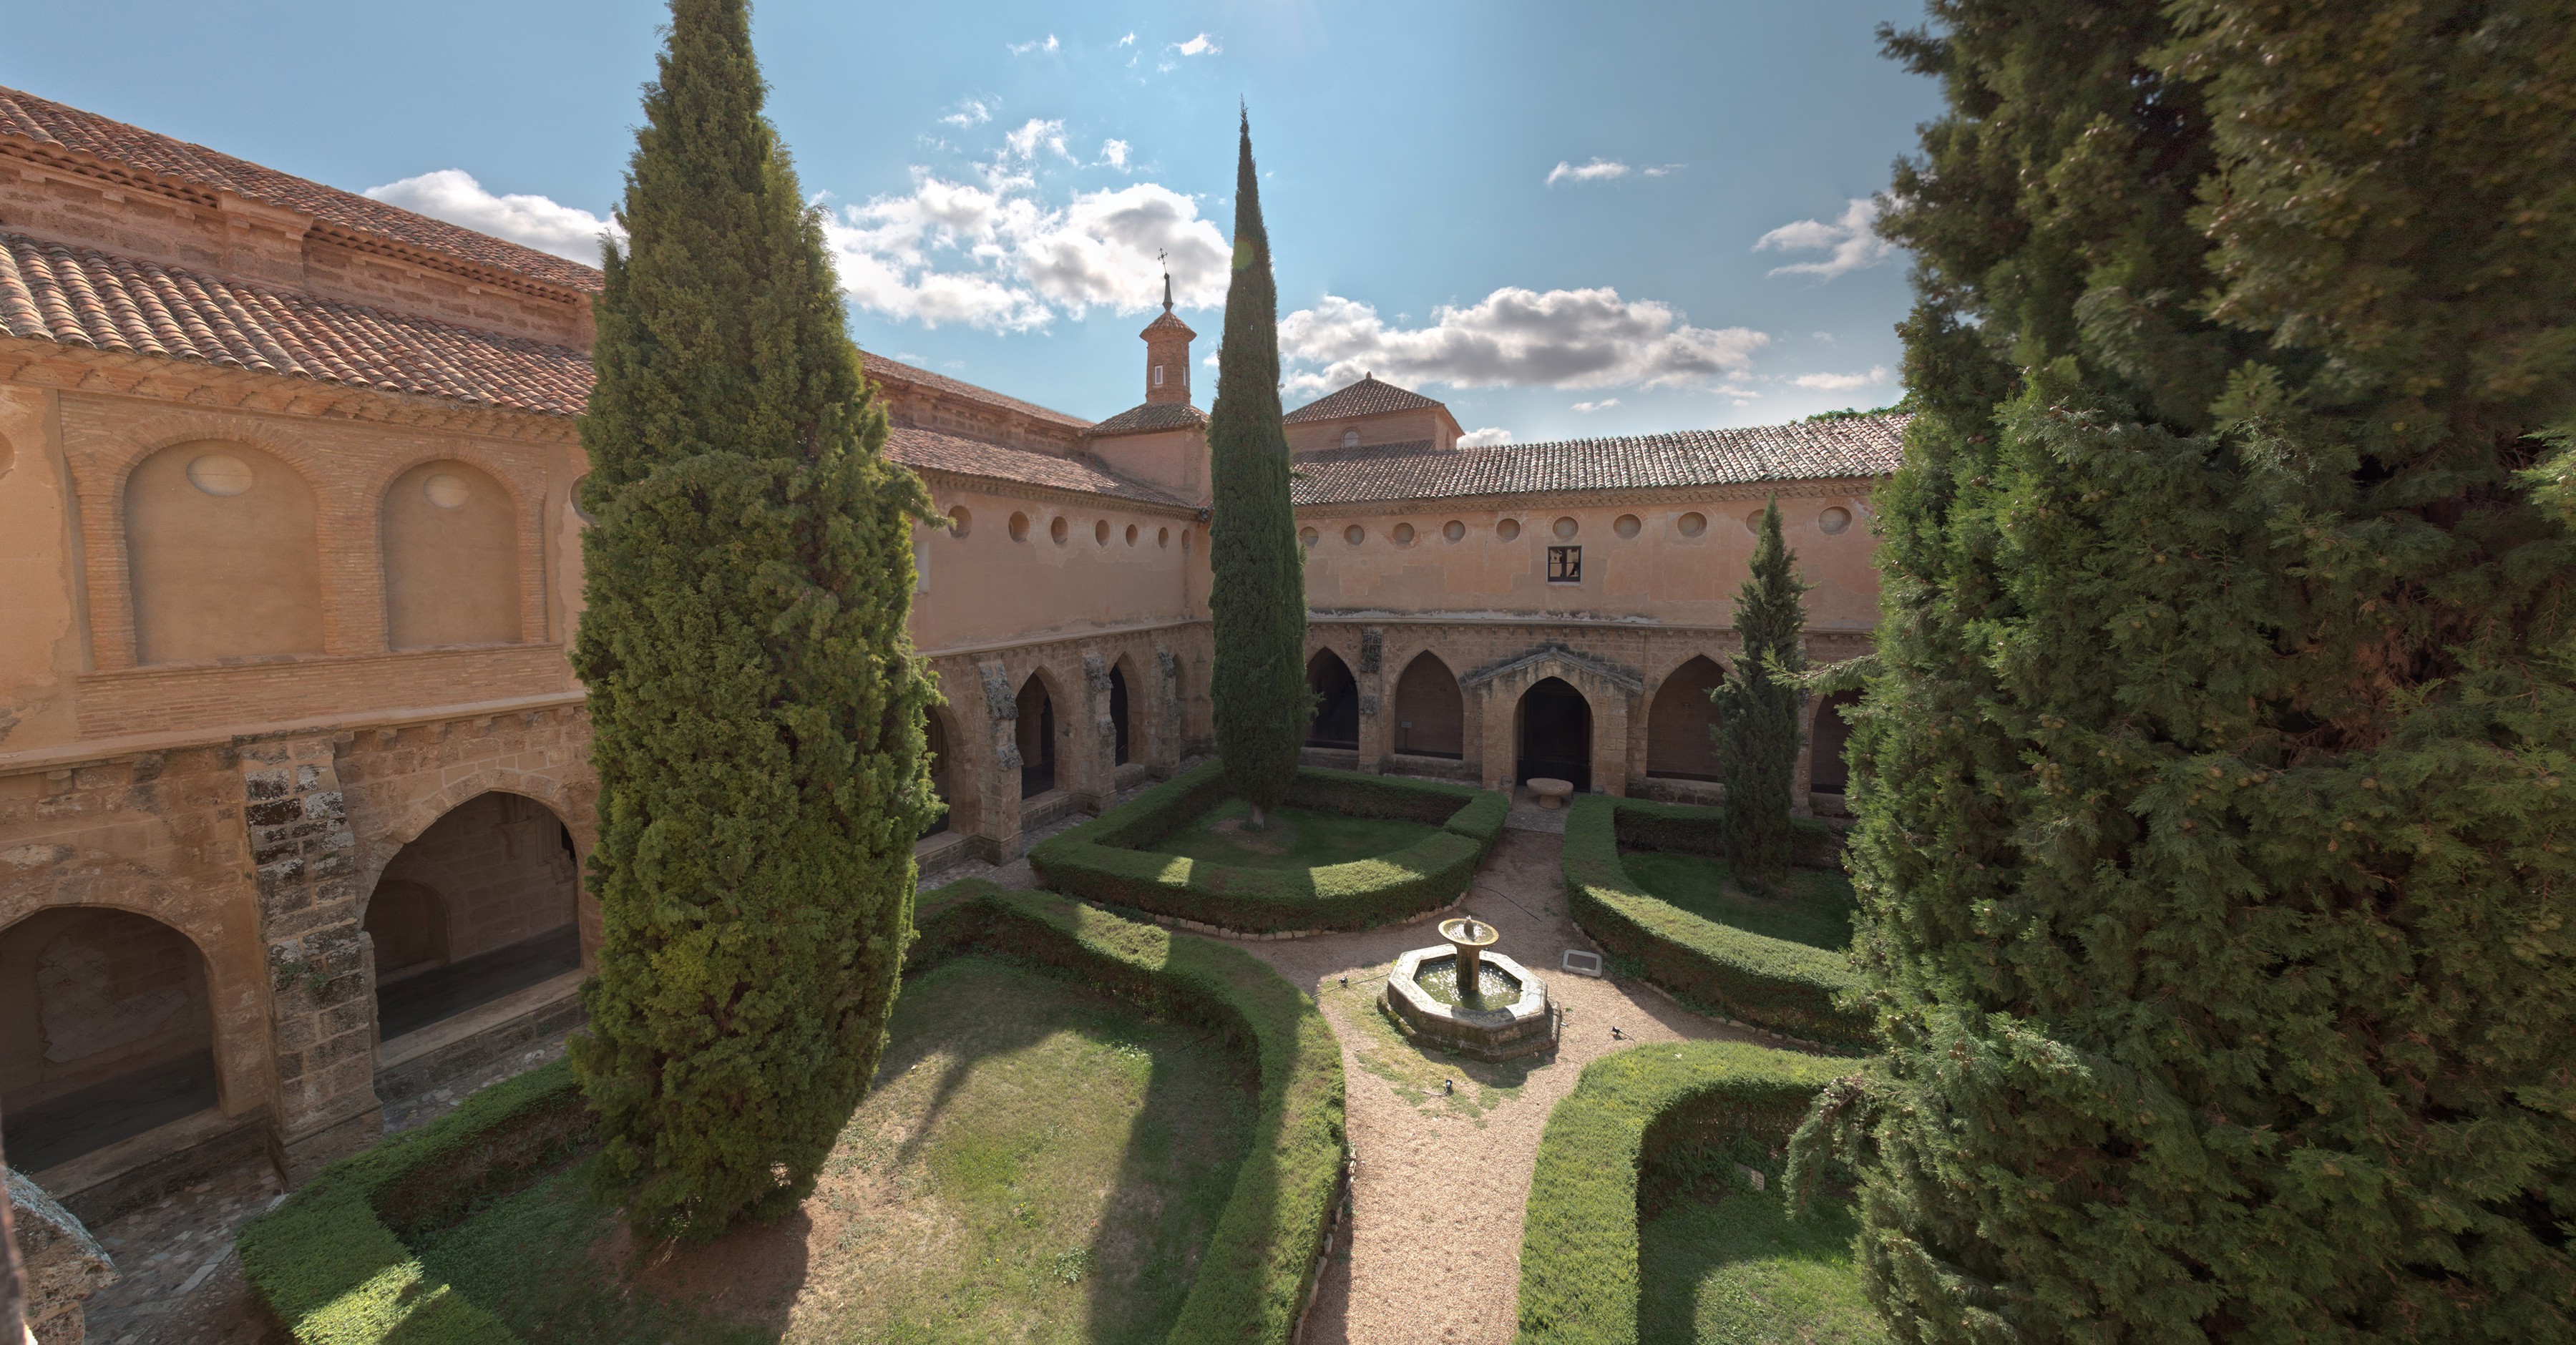 The Cistercian Monasterio de Piedra in Zaragoza province now boasts a hotel, spa and beautiful parkland complete with 21st century comforts